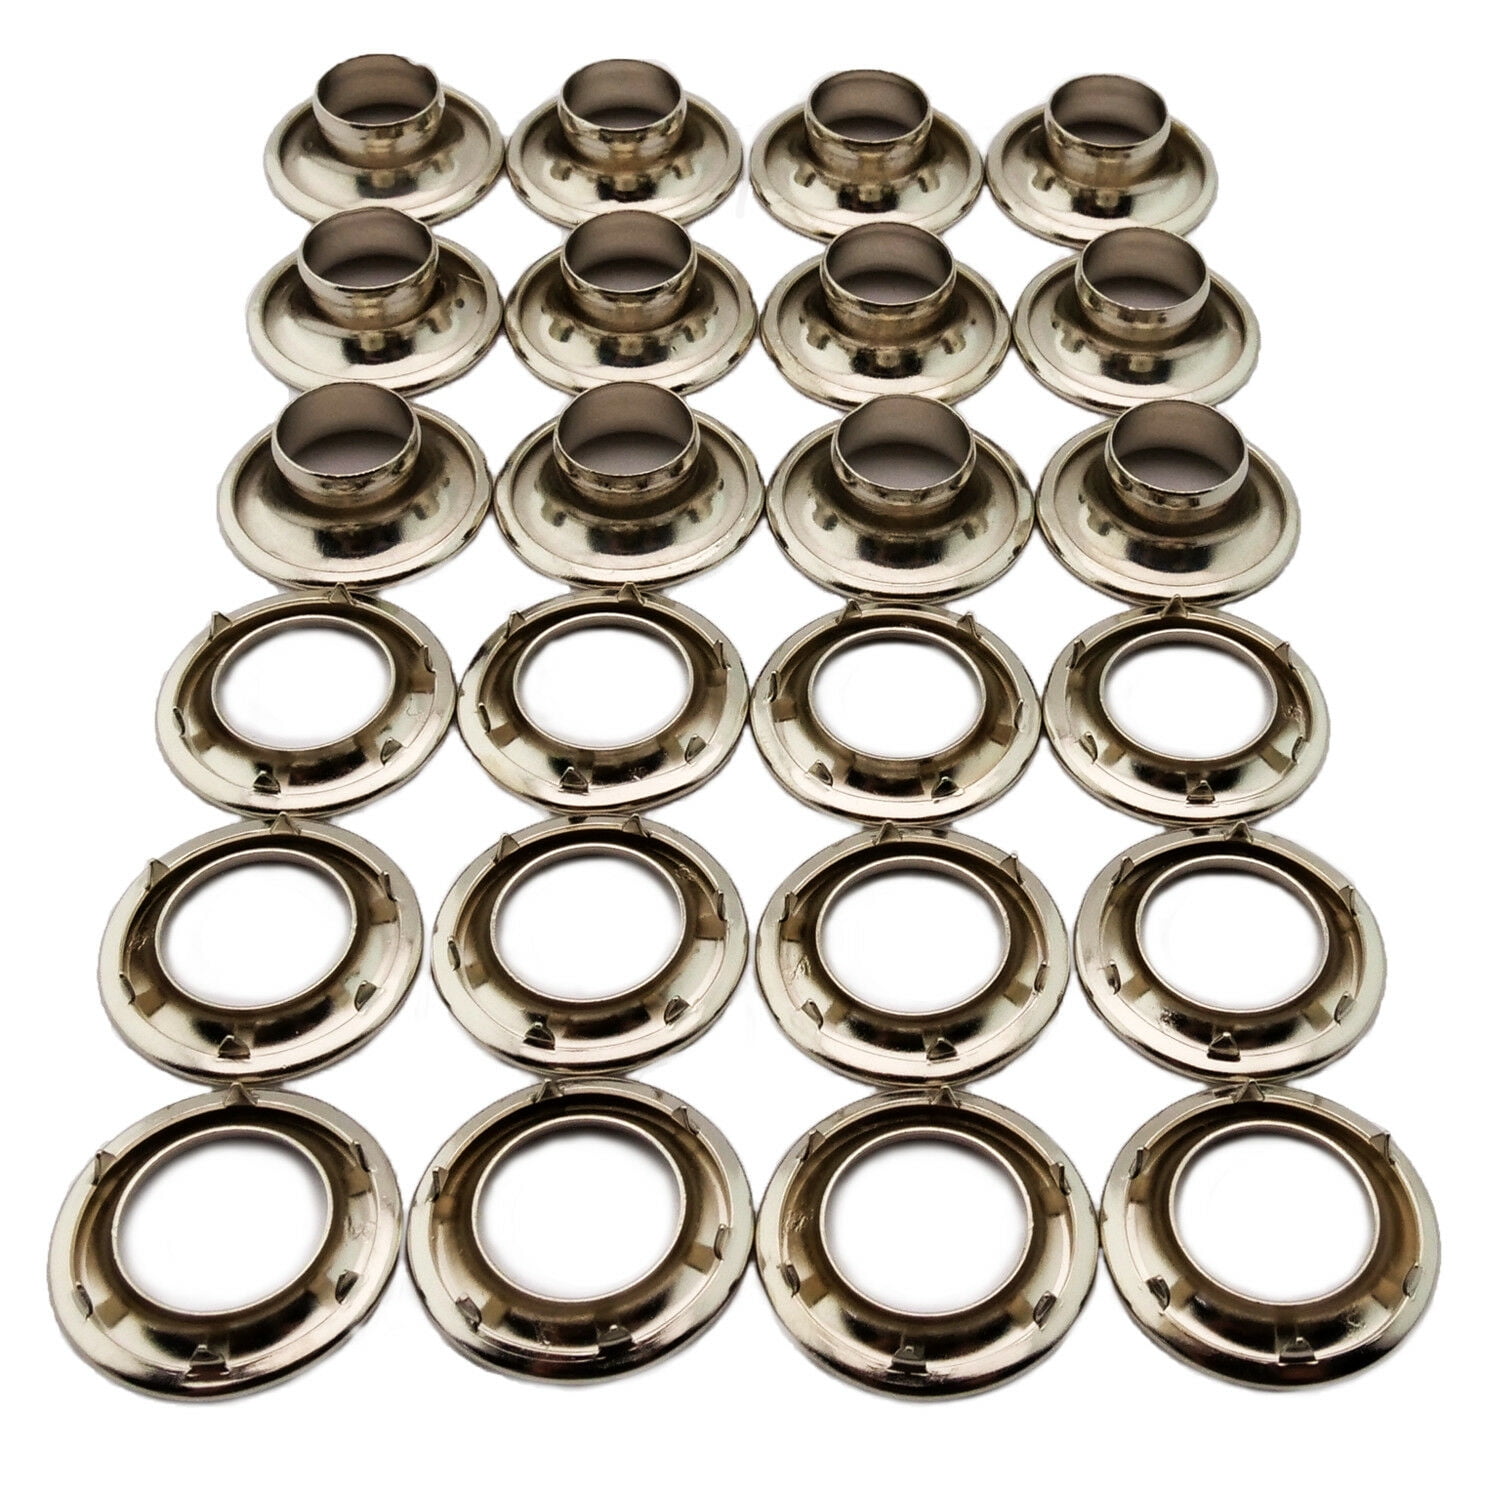 Osborne Nickel Plated Grommets & Spur Washers #N2-3 144 Sets Size 3 C.S 